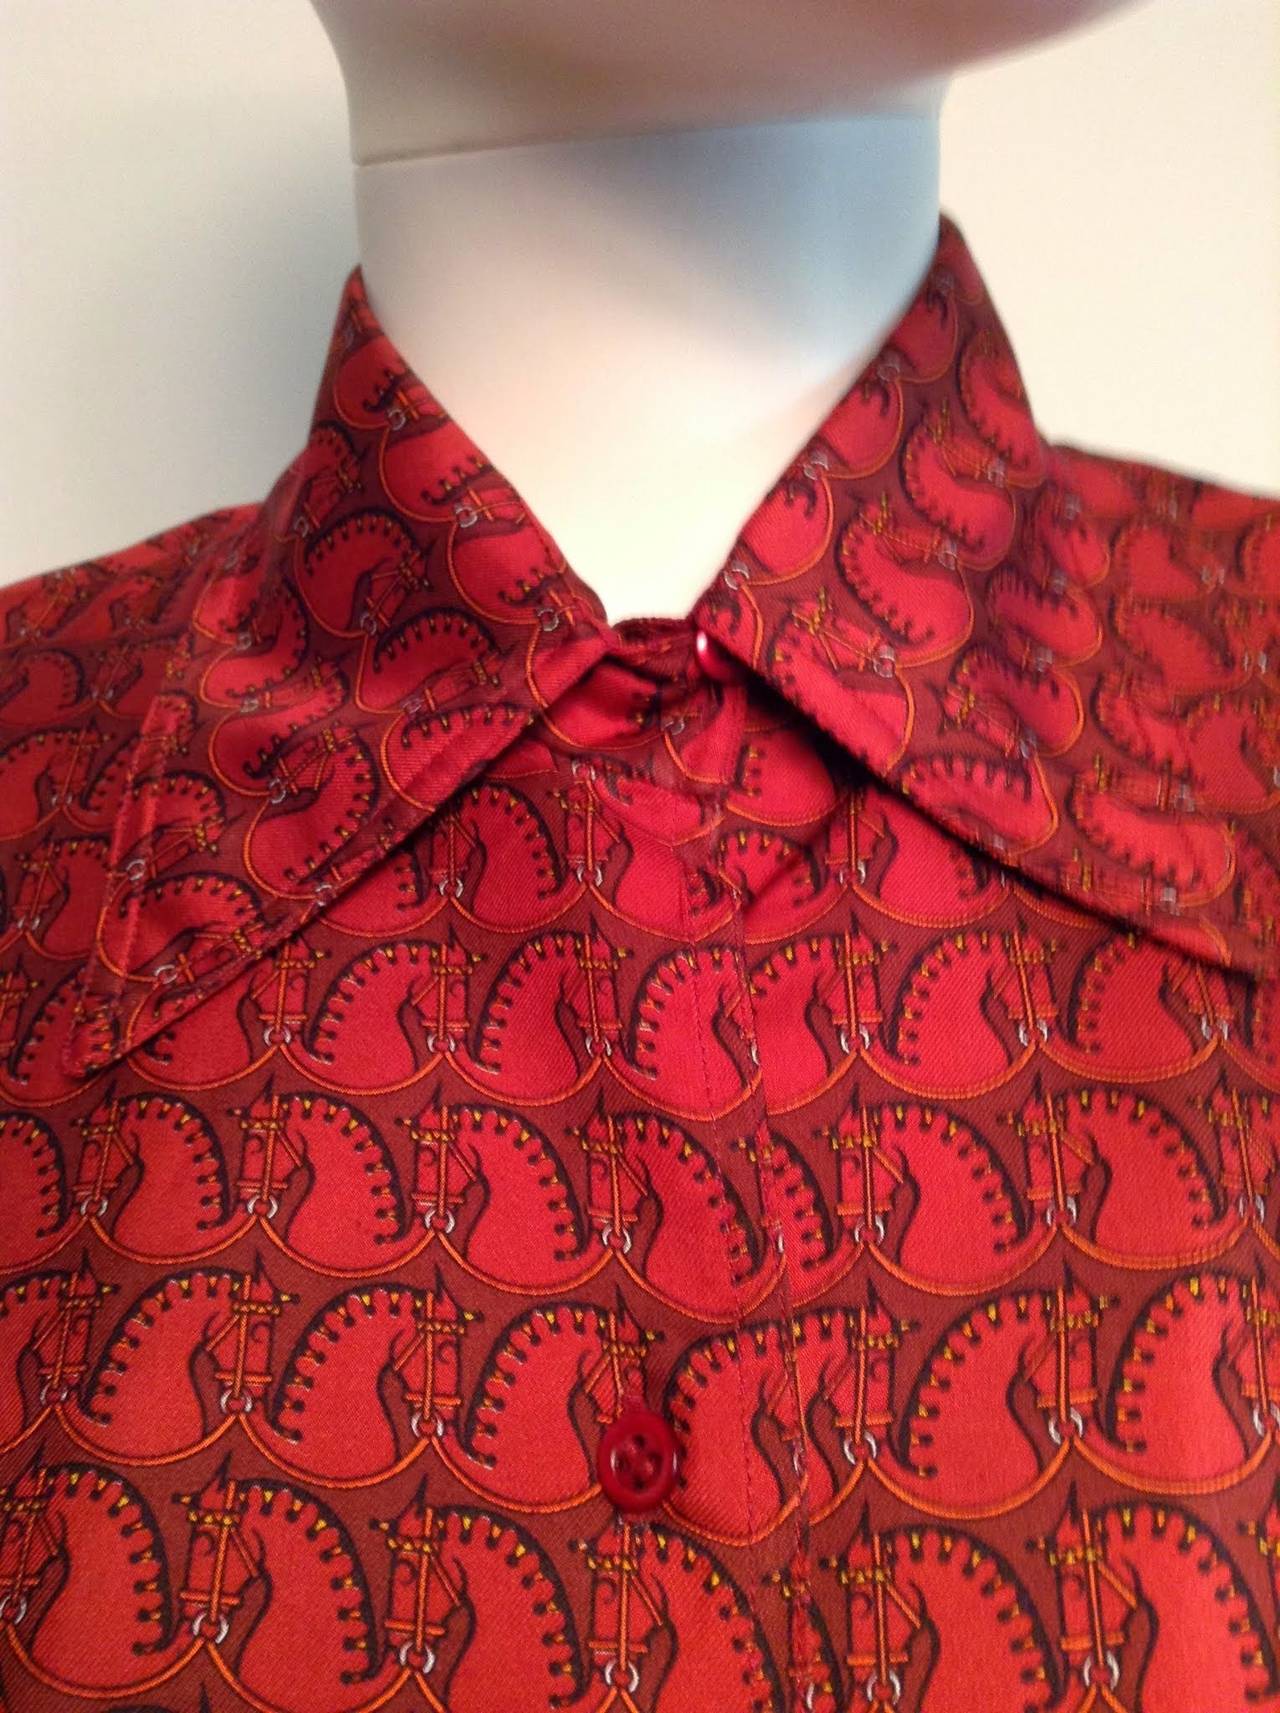 Circa 70s, this Hermes Vintage Silk Horse Head Blouse is a great addition to any Hermes collection. Features long sleeve, collar and button up closure. 

Measurements: 26